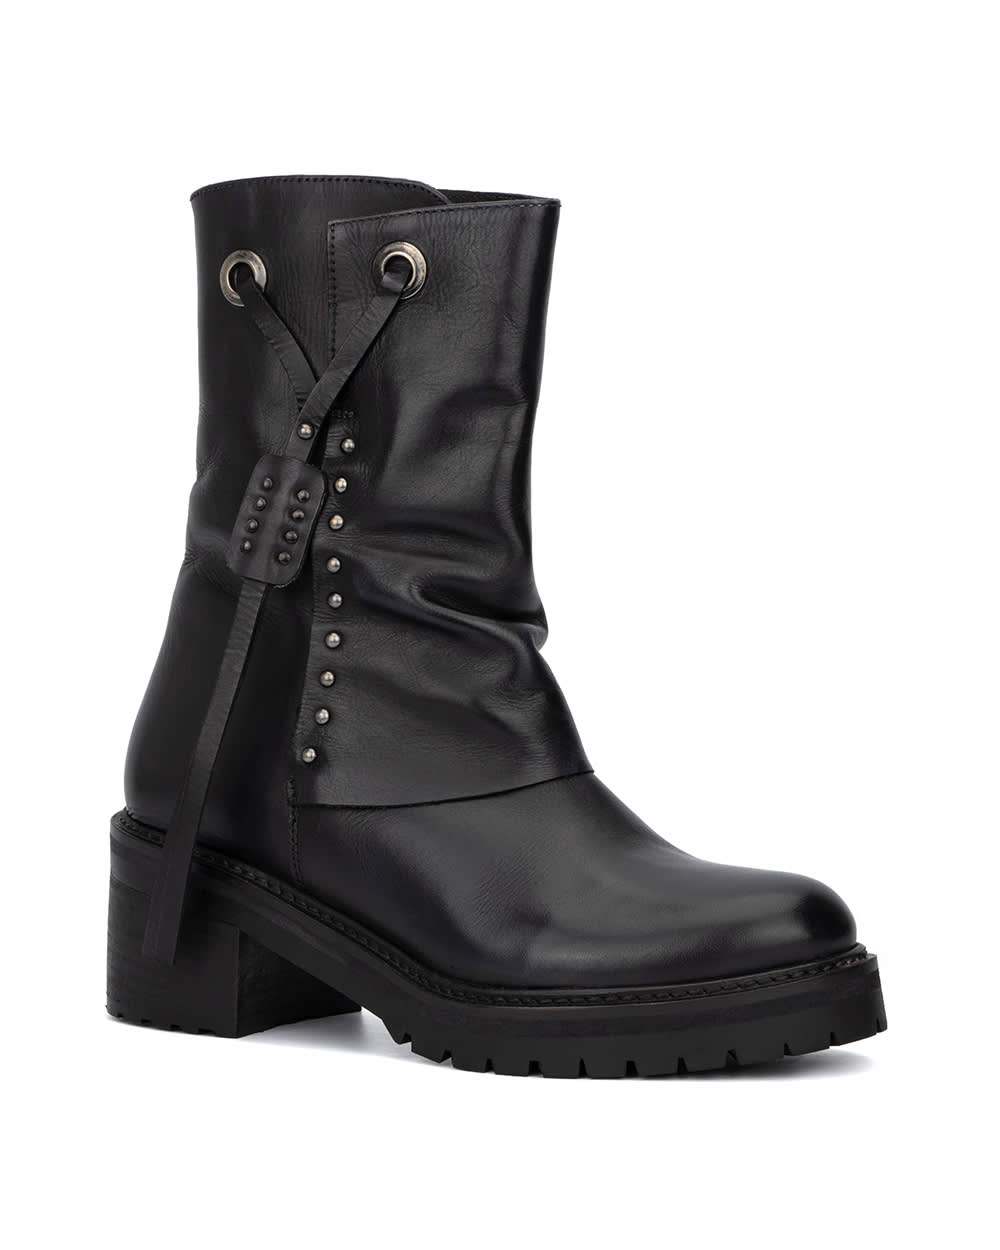 Vintage Foundry Co. Women's Madeline Boot